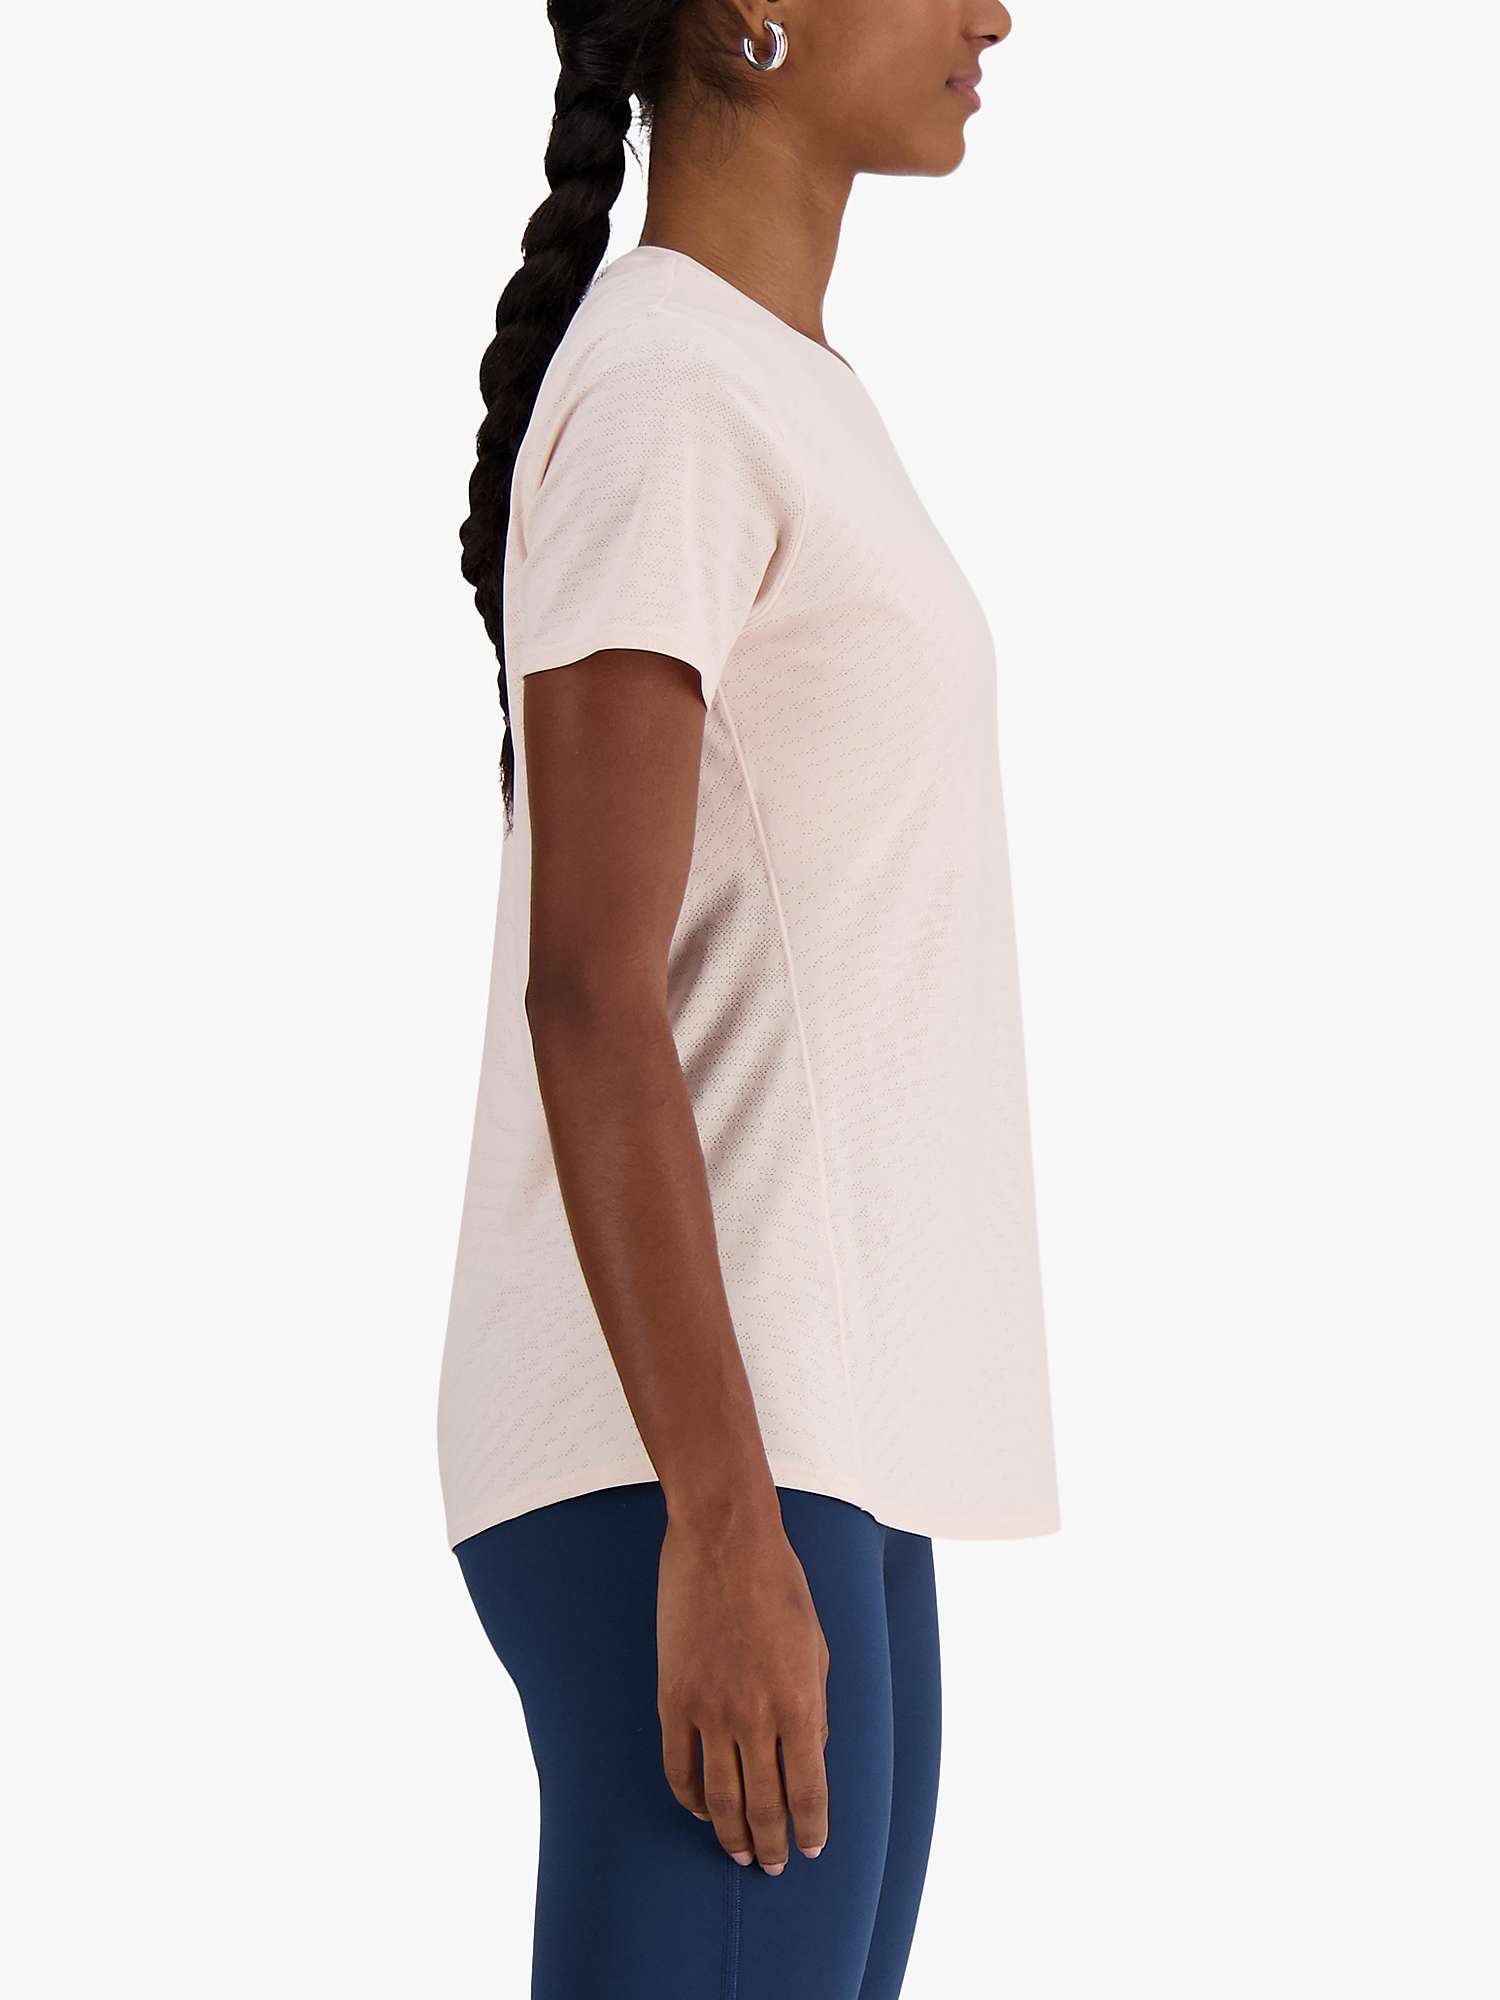 Buy New Balance Breathable Women's Short Sleeve Top, Light Pink Online at johnlewis.com